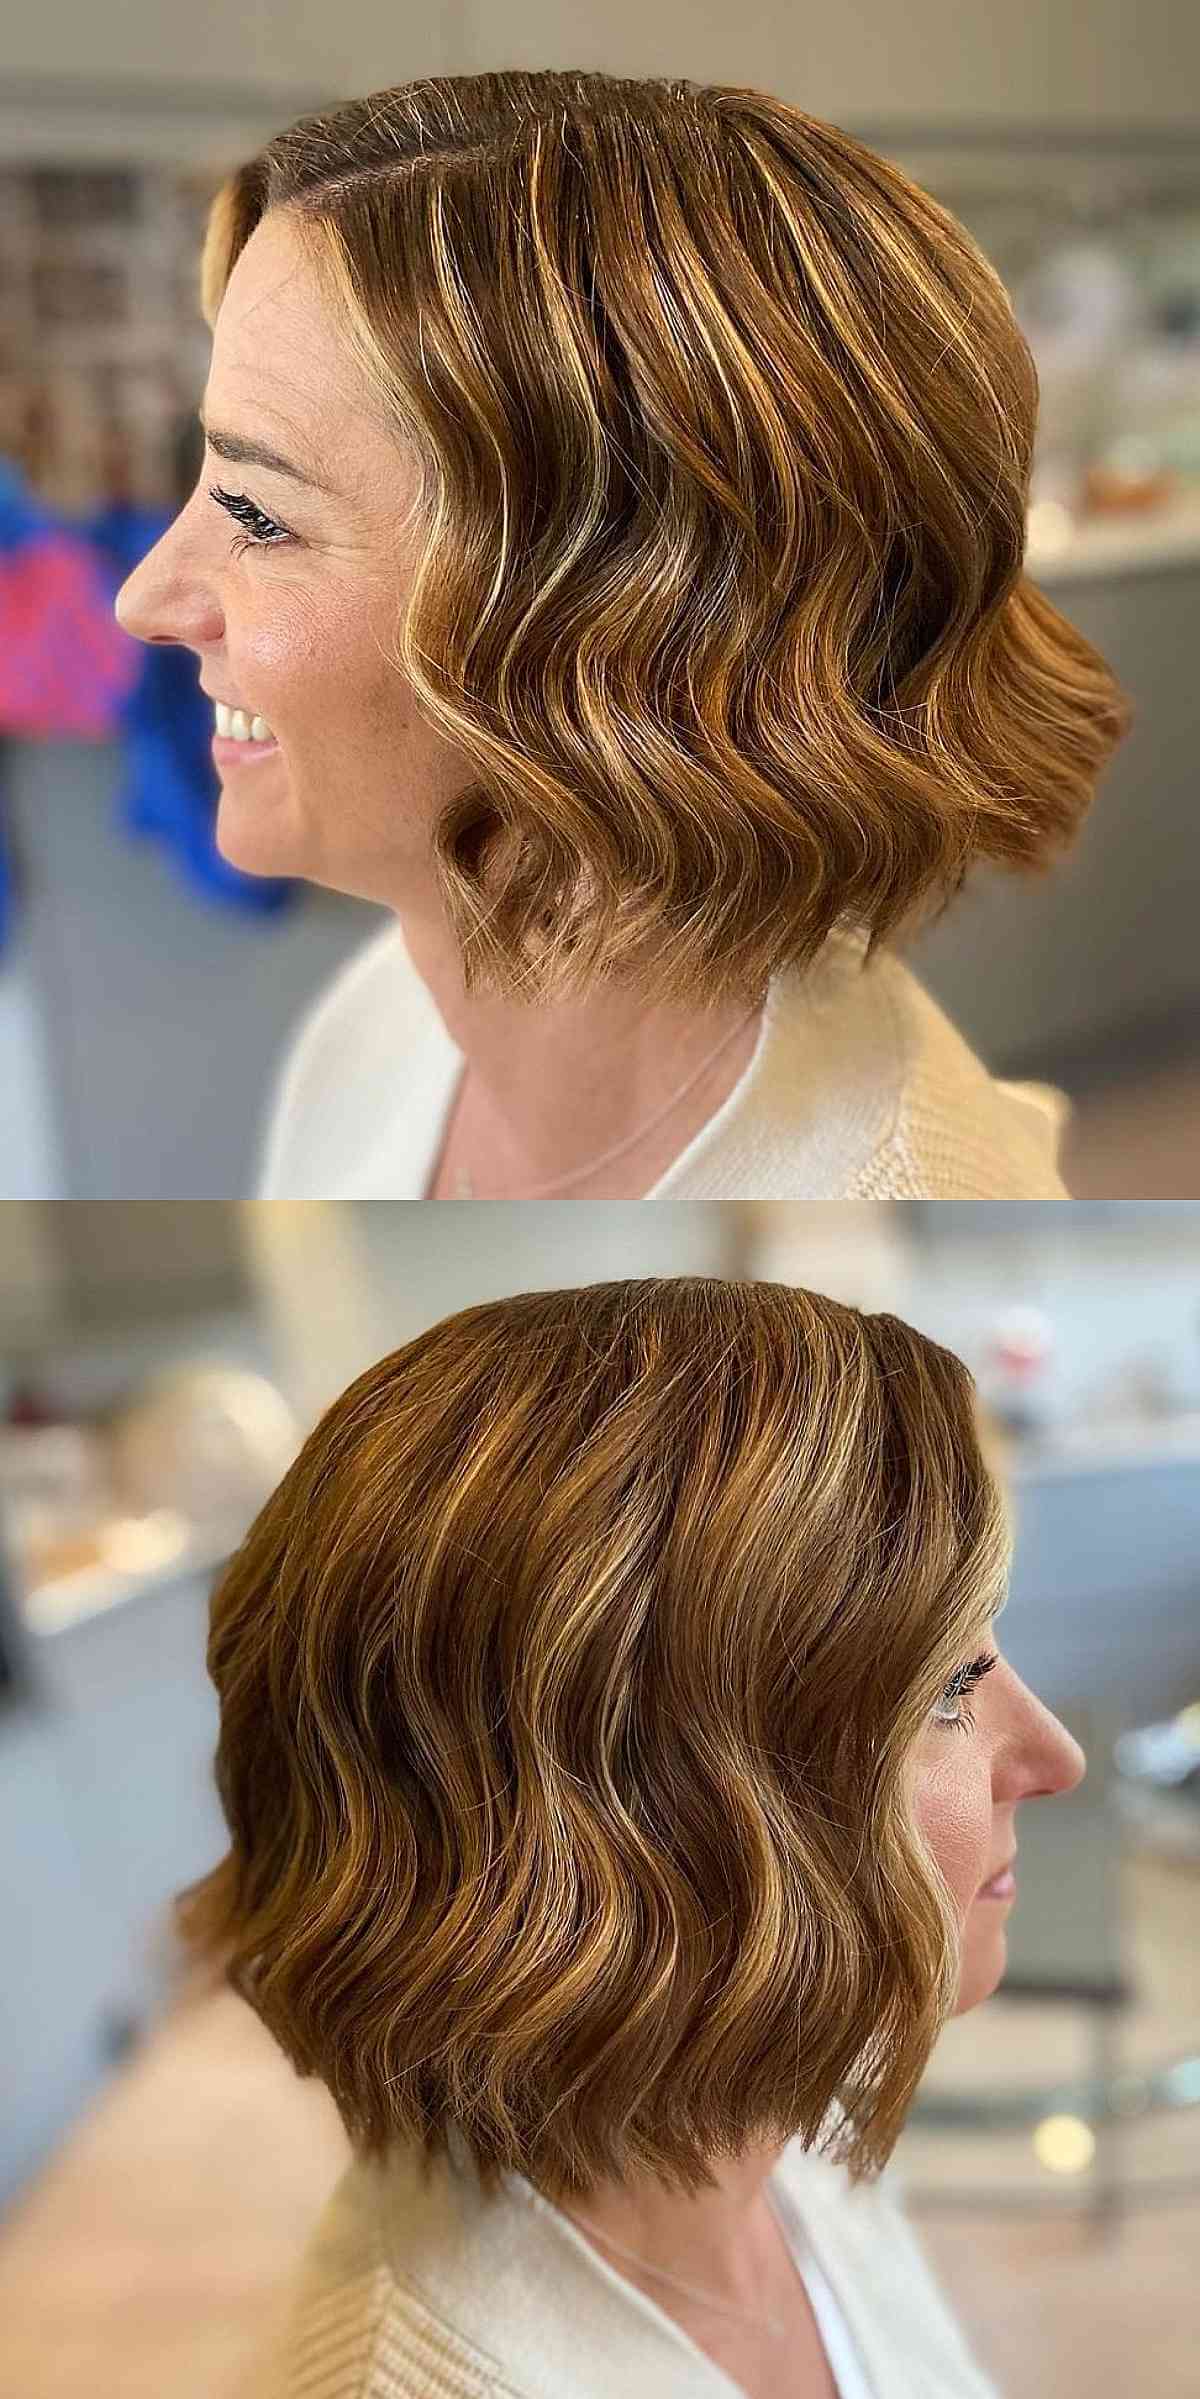 Short Above the Shoulders Bob with Glam Waves for Women Over 40